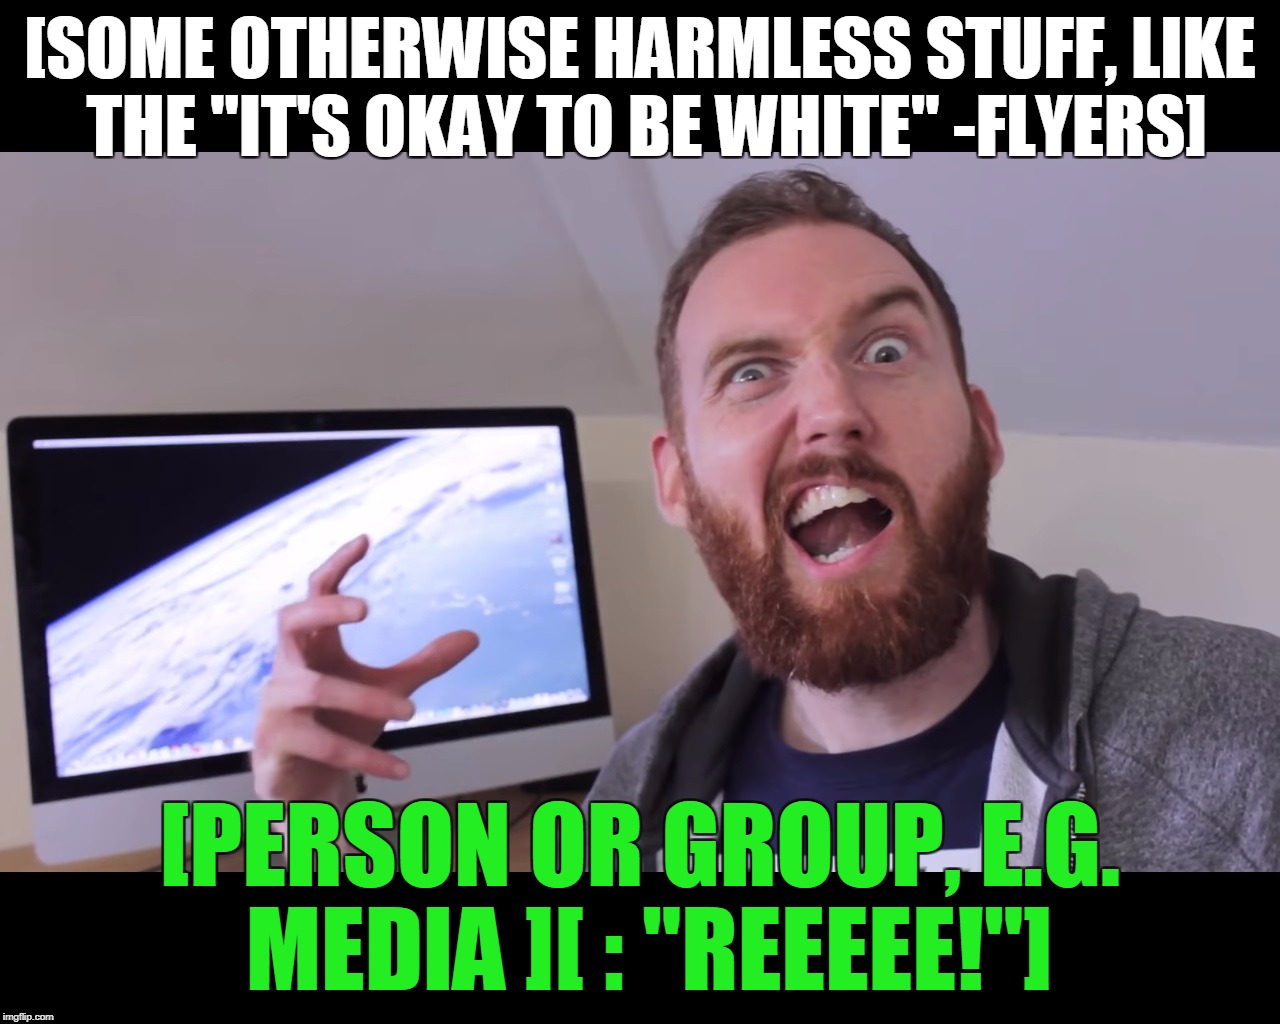 Media Overreaction | [SOME OTHERWISE HARMLESS STUFF, LIKE THE "IT'S OKAY TO BE WHITE" -FLYERS]; [PERSON OR GROUP, E.G. MEDIA ][ : "REEEEE!"] | image tagged in humor,truth,pepe the frog | made w/ Imgflip meme maker